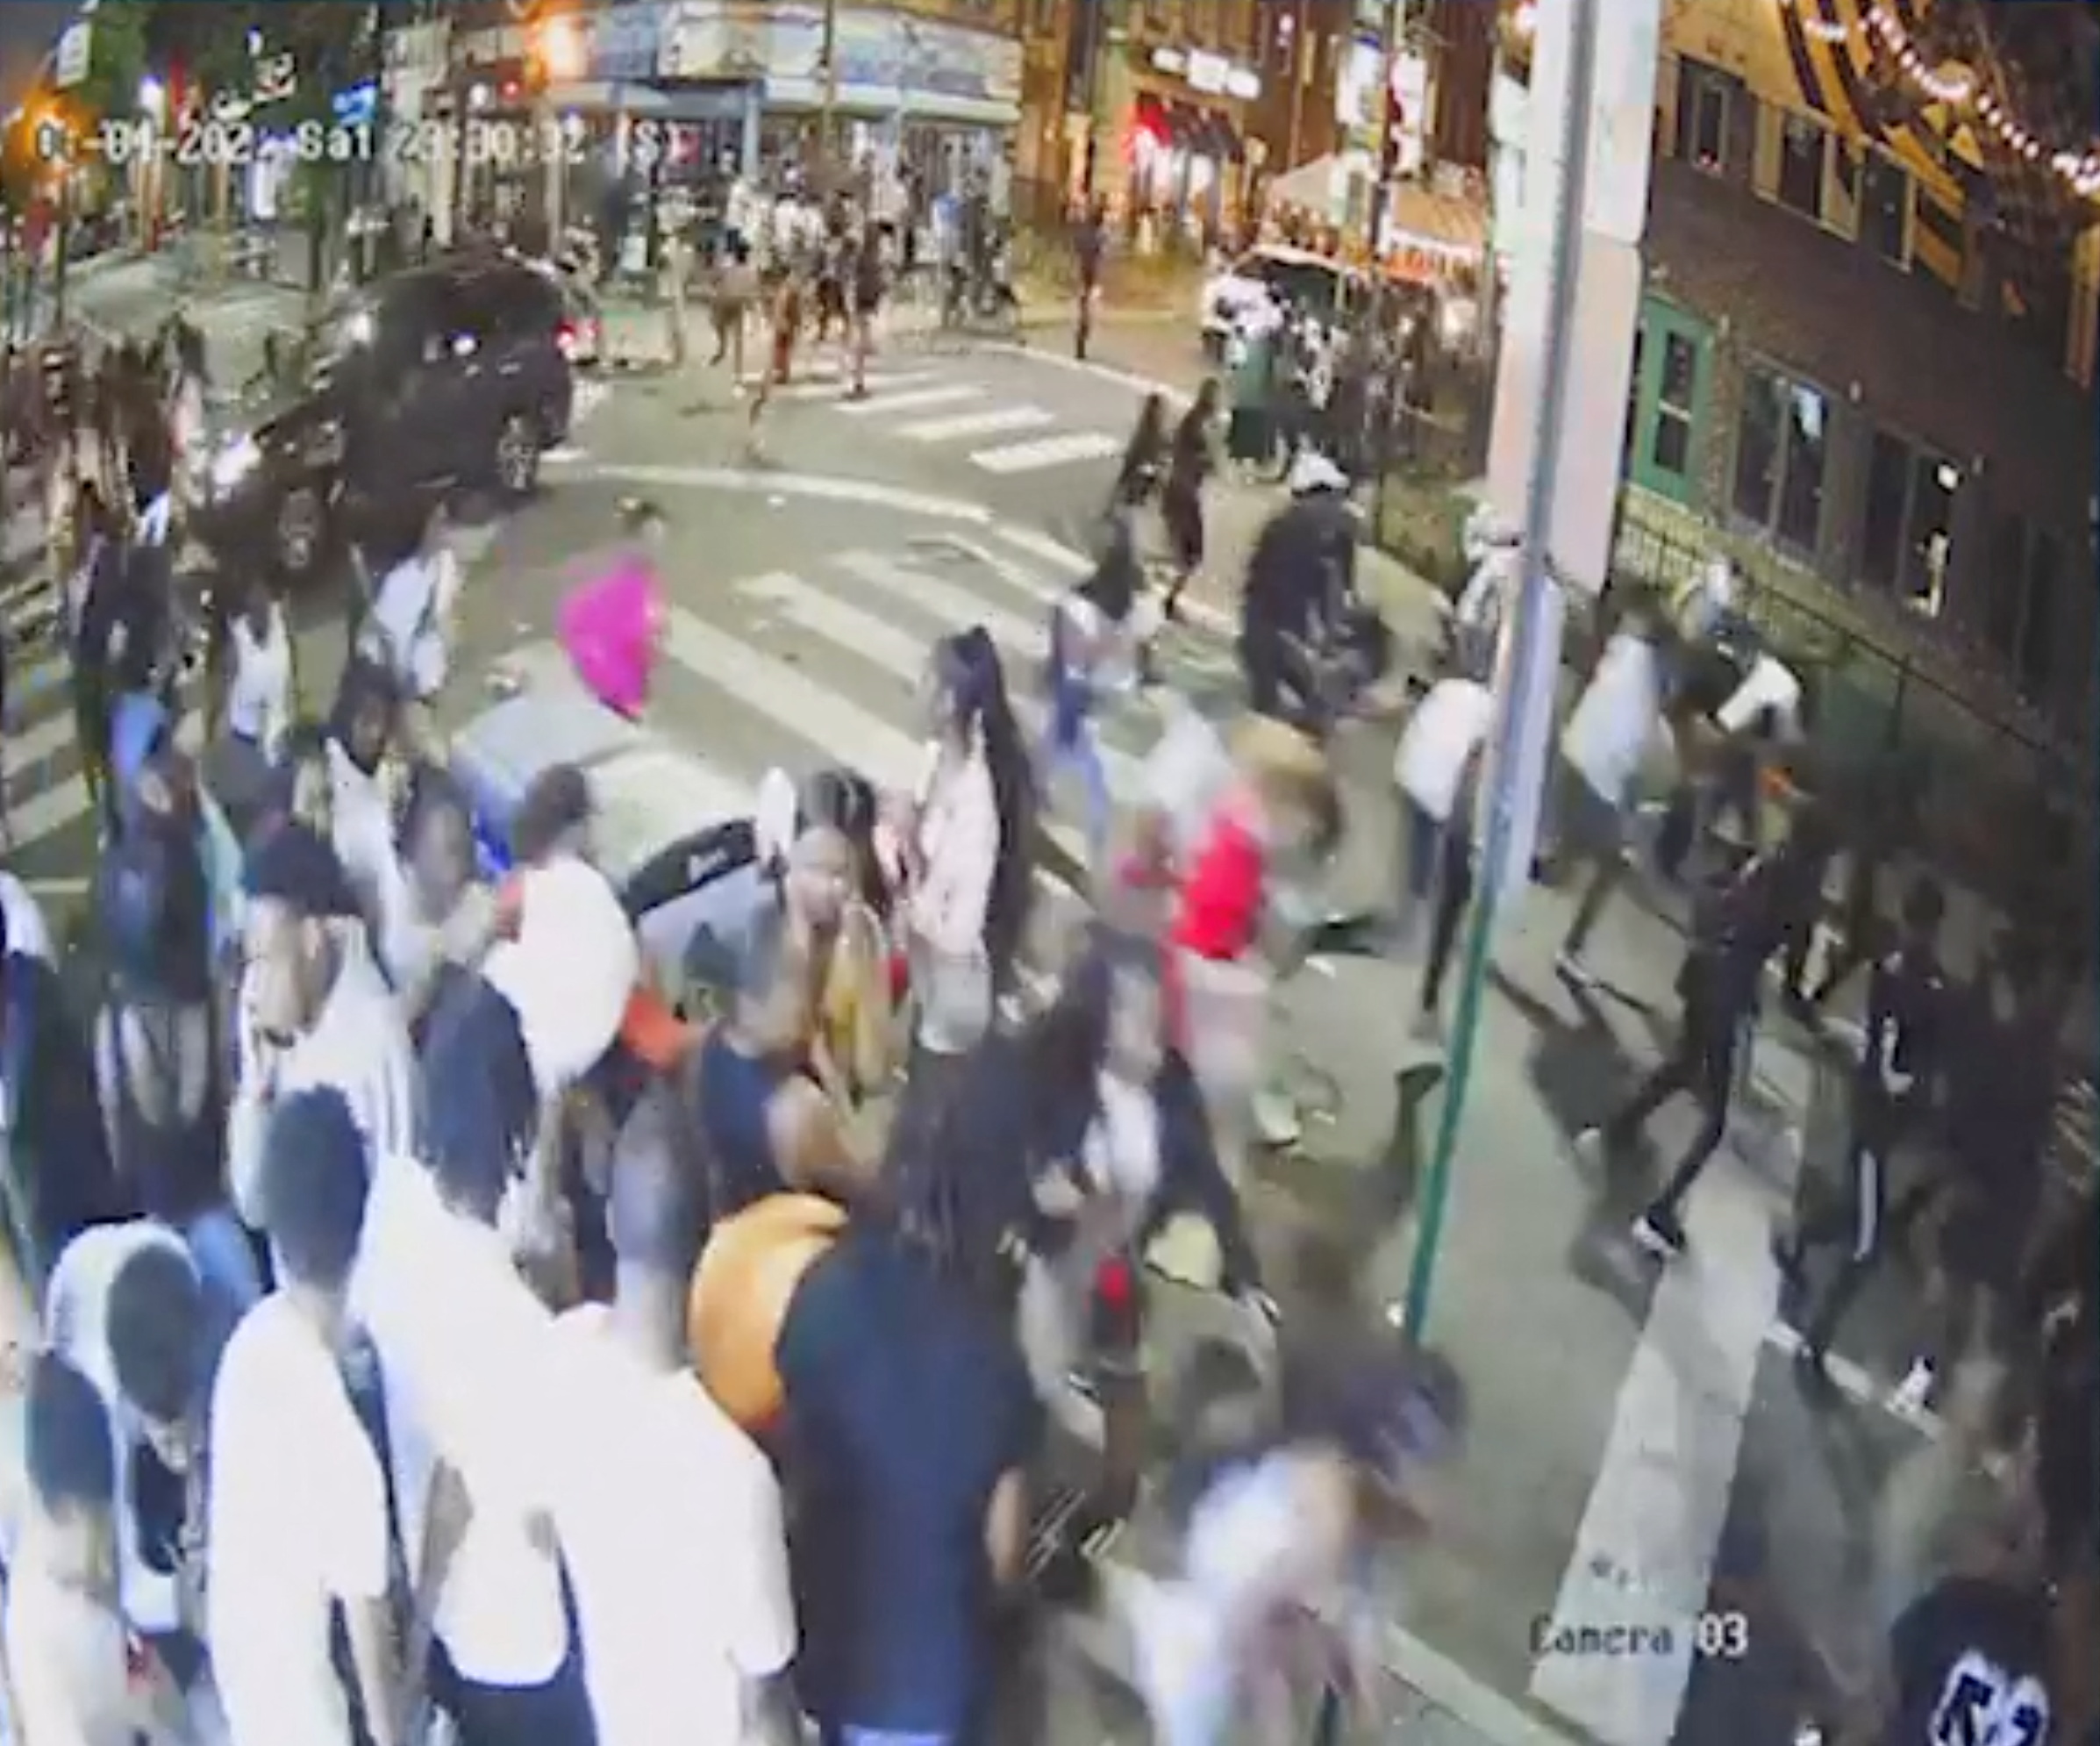 A screen grab from a surveillance video from the shooting shows people on a crowded street running in panic, presumably after gun shots were fired, in Philadelphia, Pennsylvania